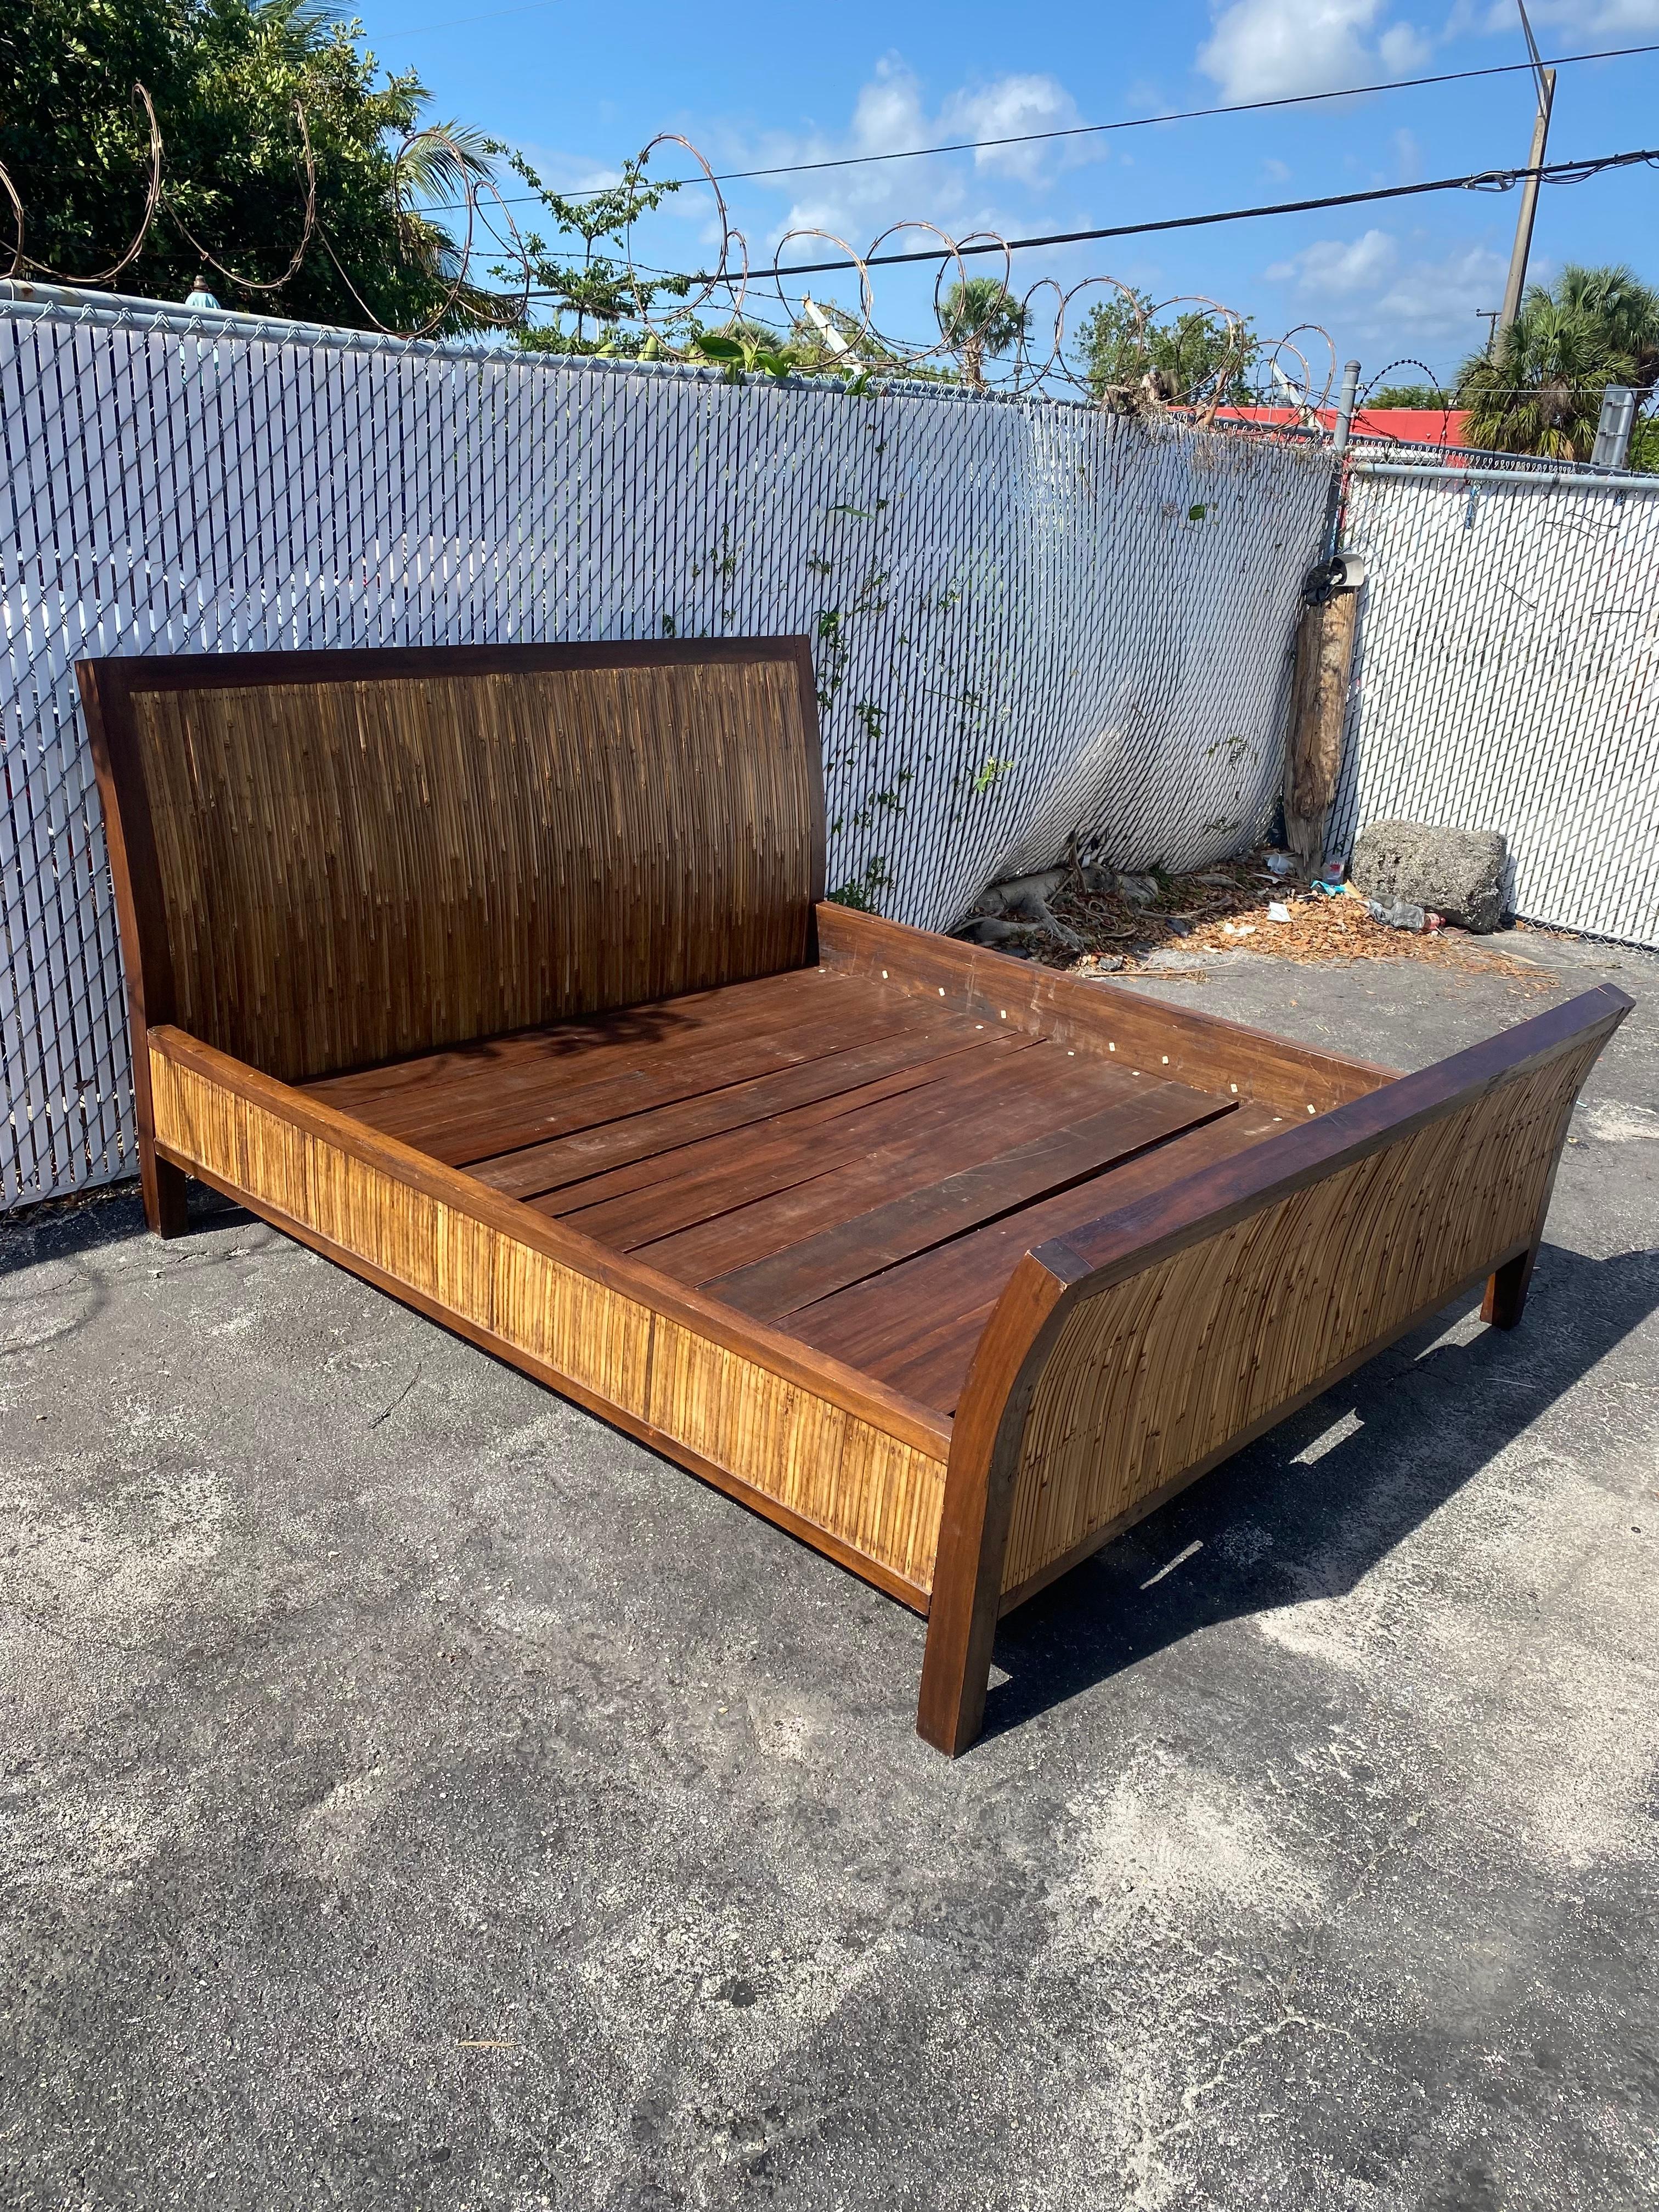 On offer on this occasion is one of the most stunning and rare, Rattan inlaid wood king bed you could hope to find. Outstanding design is exhibited throughout. The beautiful monumental bed is statement piece and packed with personality!! Just look